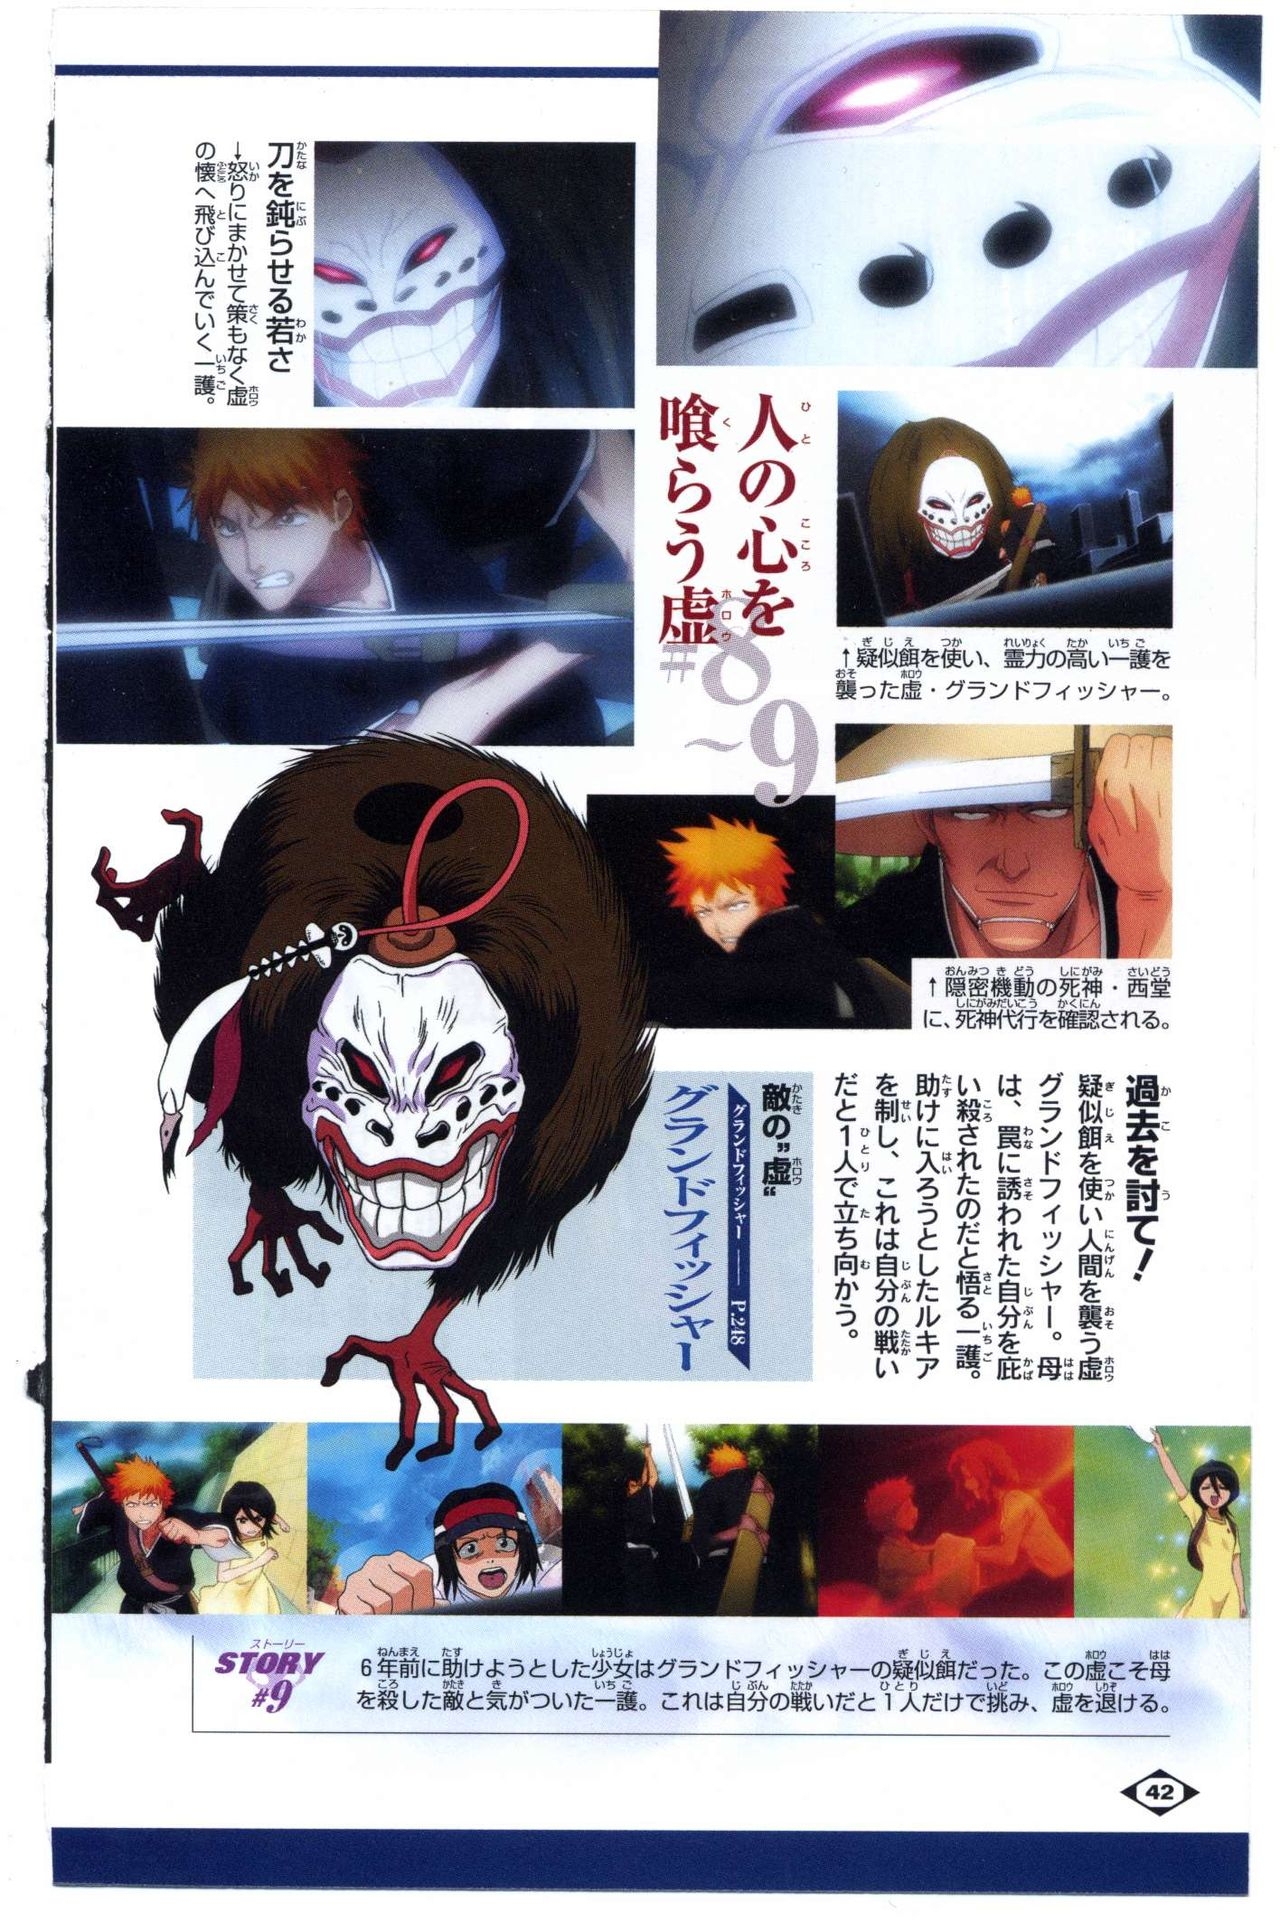 Bleach: Official Animation Book VIBEs 42